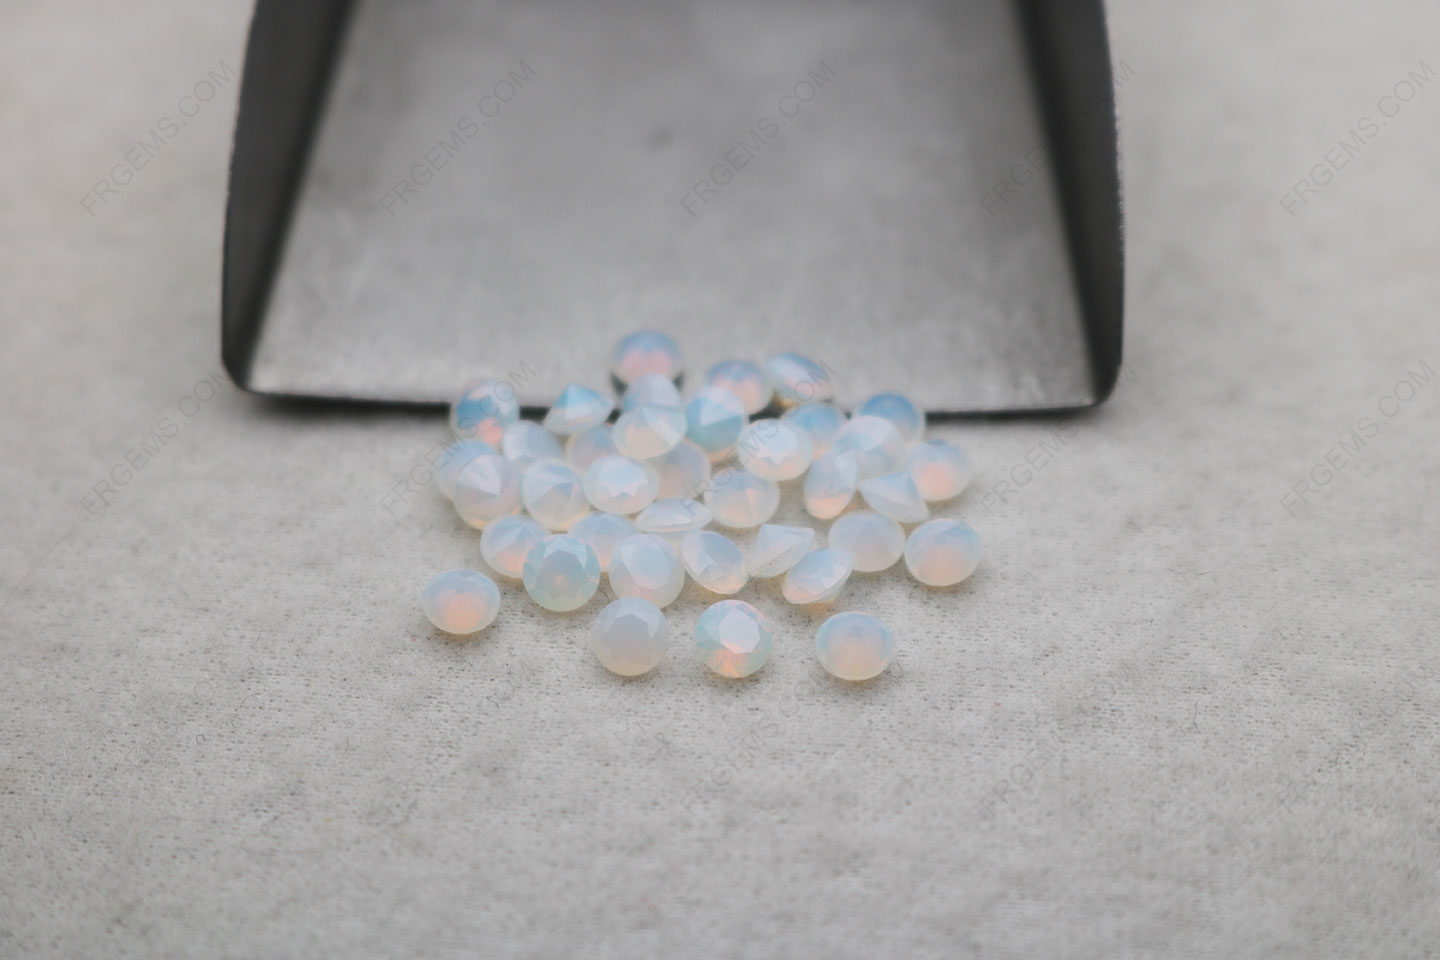 Nano Crystal Opaque Opal White Yellowish #202 Round Faceted Cut 4mm gemstones